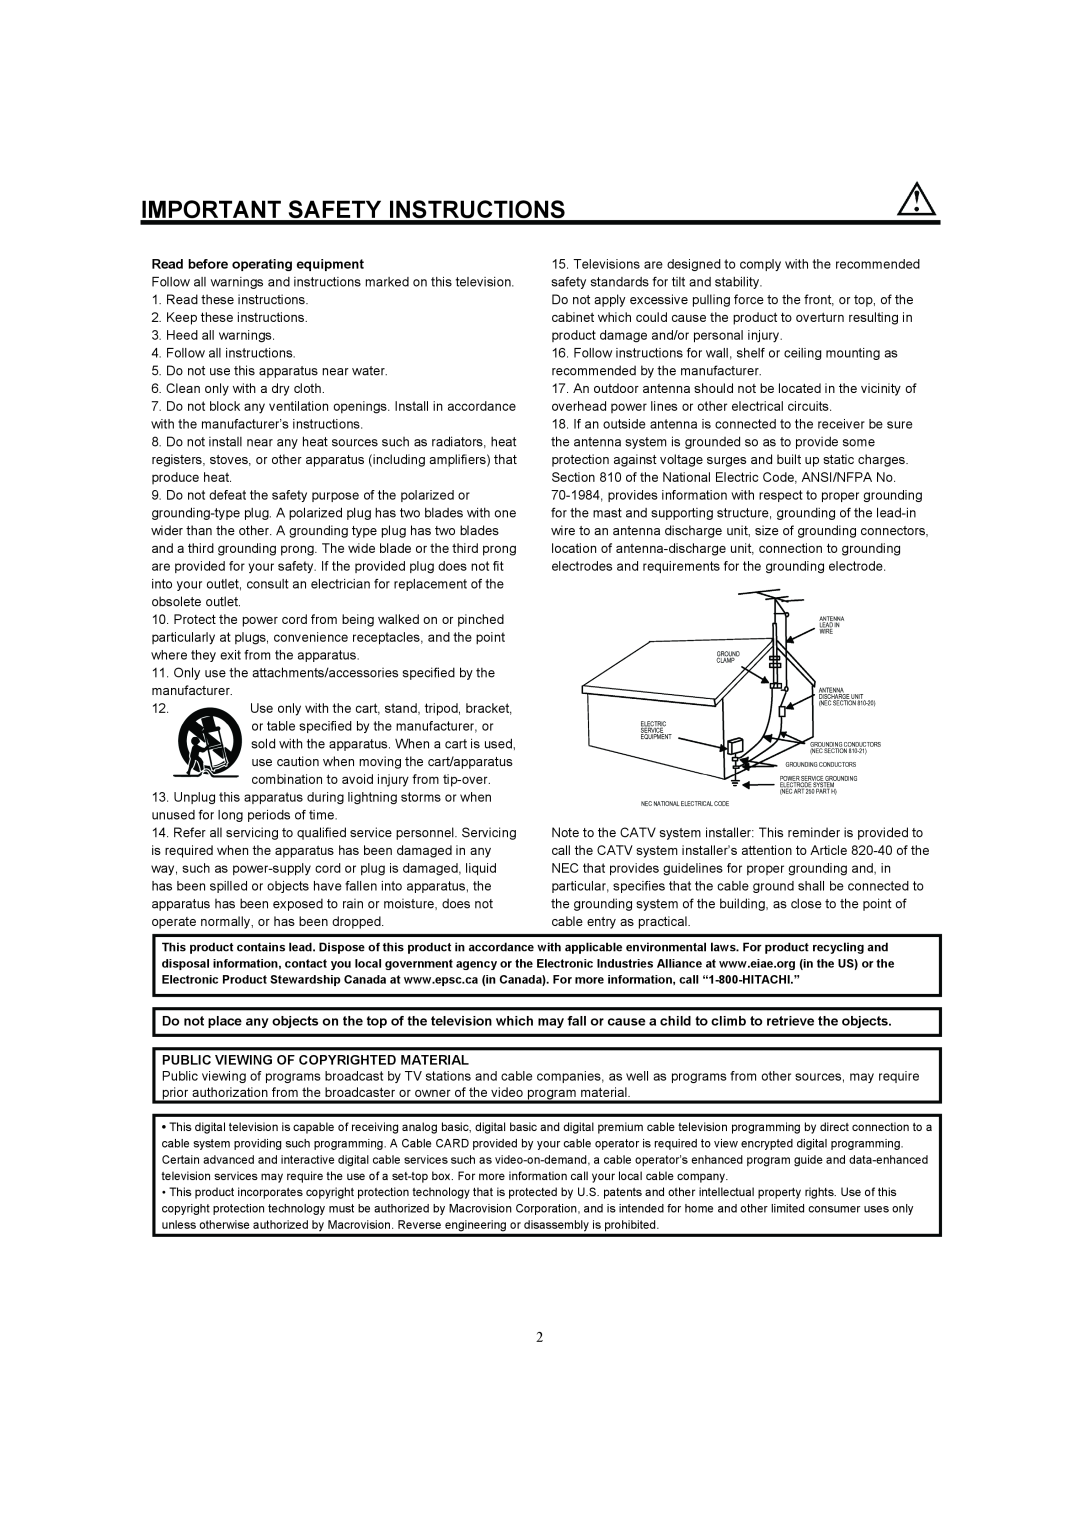 Hitachi 32HDL52A Important Safety Instructions, Read before operating equipment, Public Viewing Of Copyrighted Material 